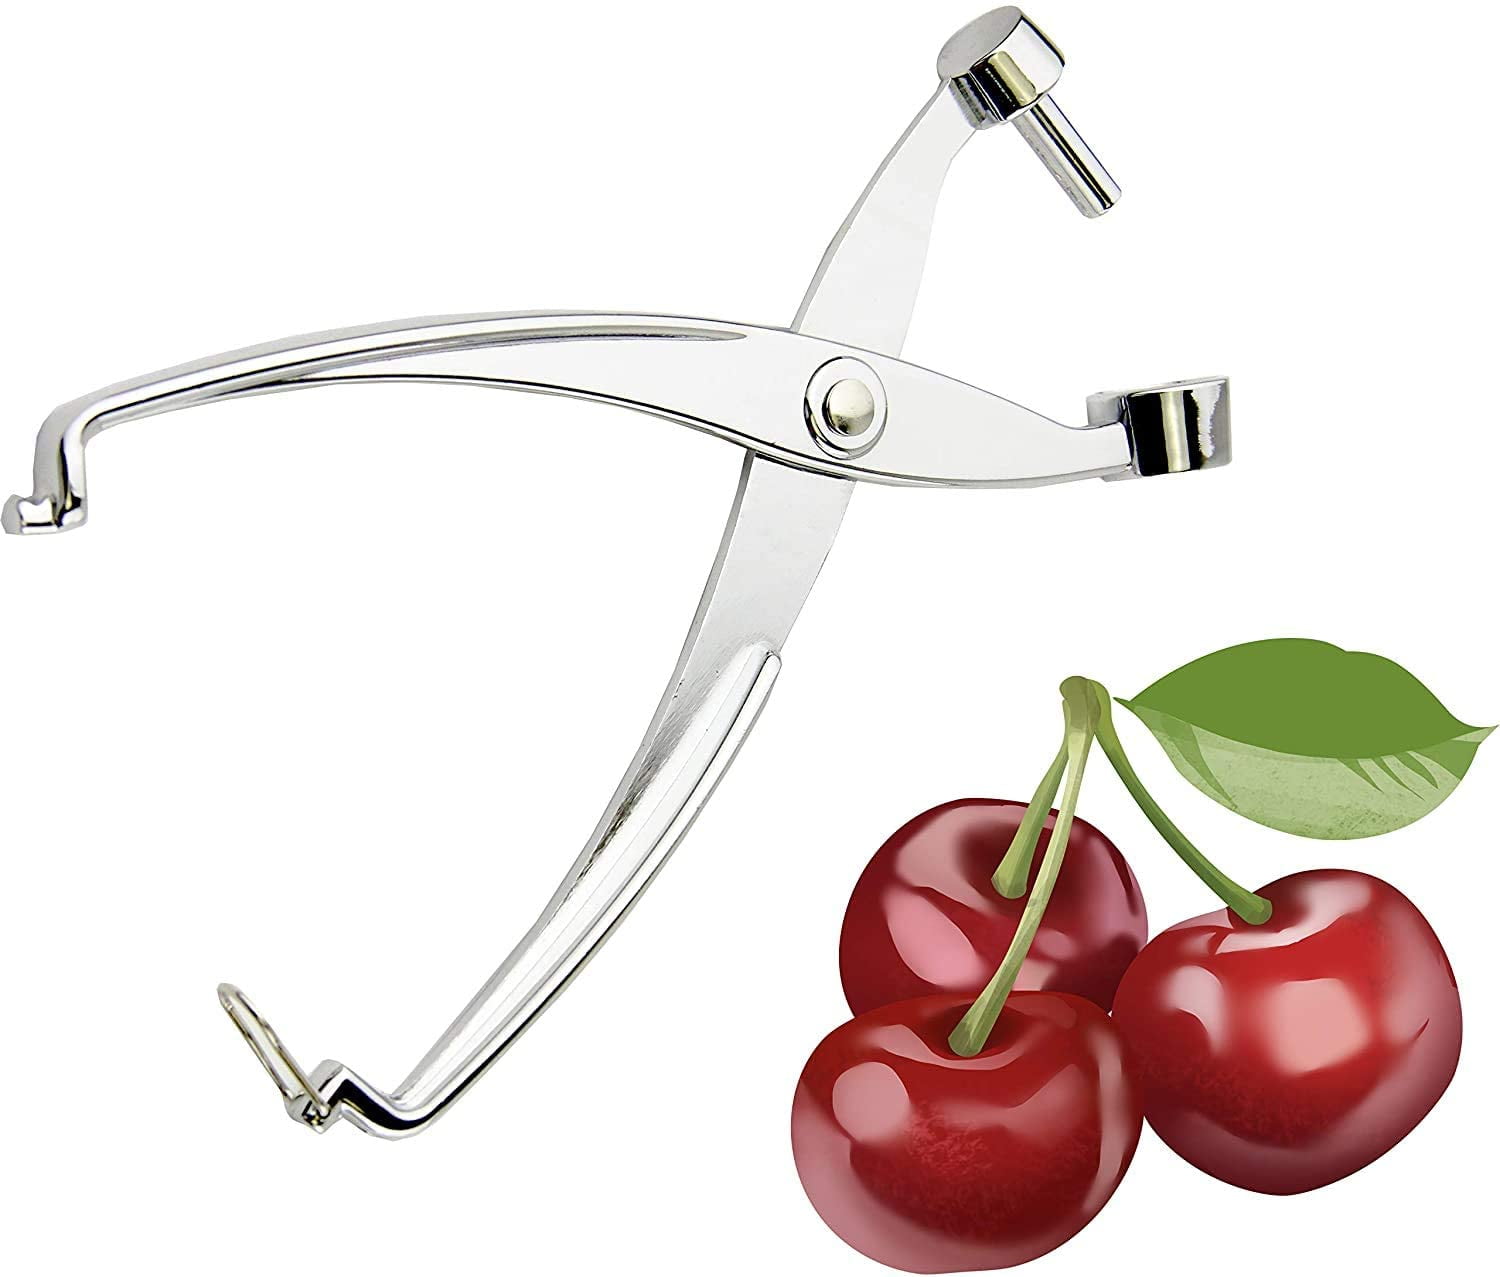 Kitchen aid Portable Cherry Jujube Nucleator Corer，Safe Easy Removal Cherry Pitter Olive Stoner Seed Remover Tool for Home Jam Cake Cooking.Space-Saving Lock Design and Lengthened Splatter Shield 